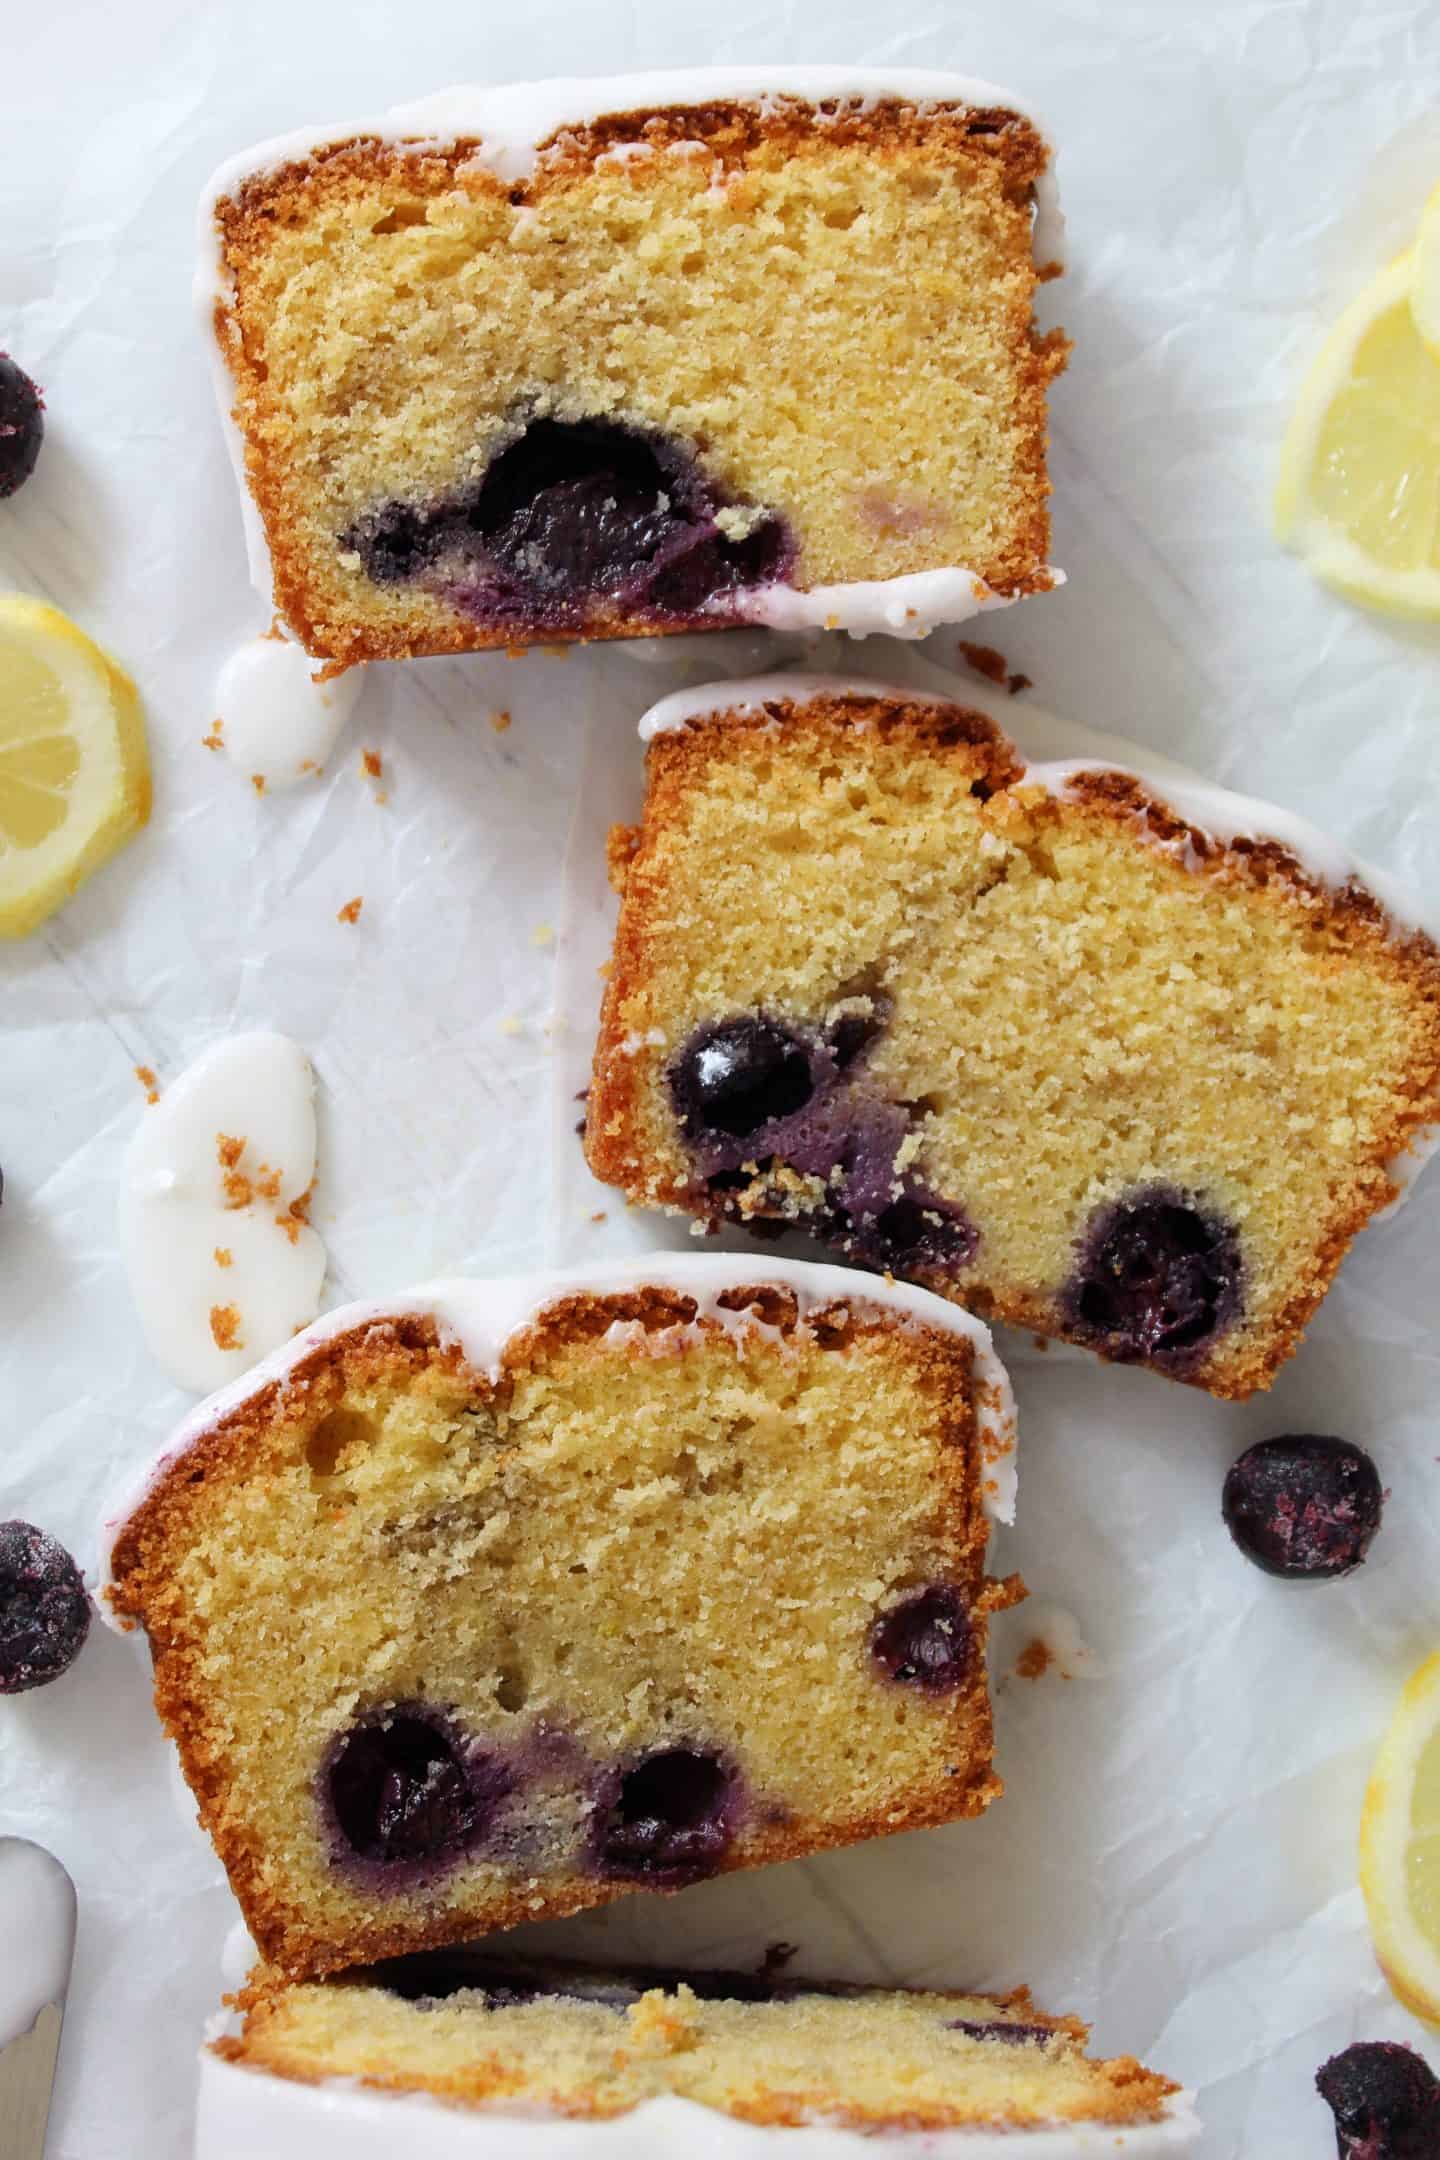 gluten free lemon and blueberry loaf